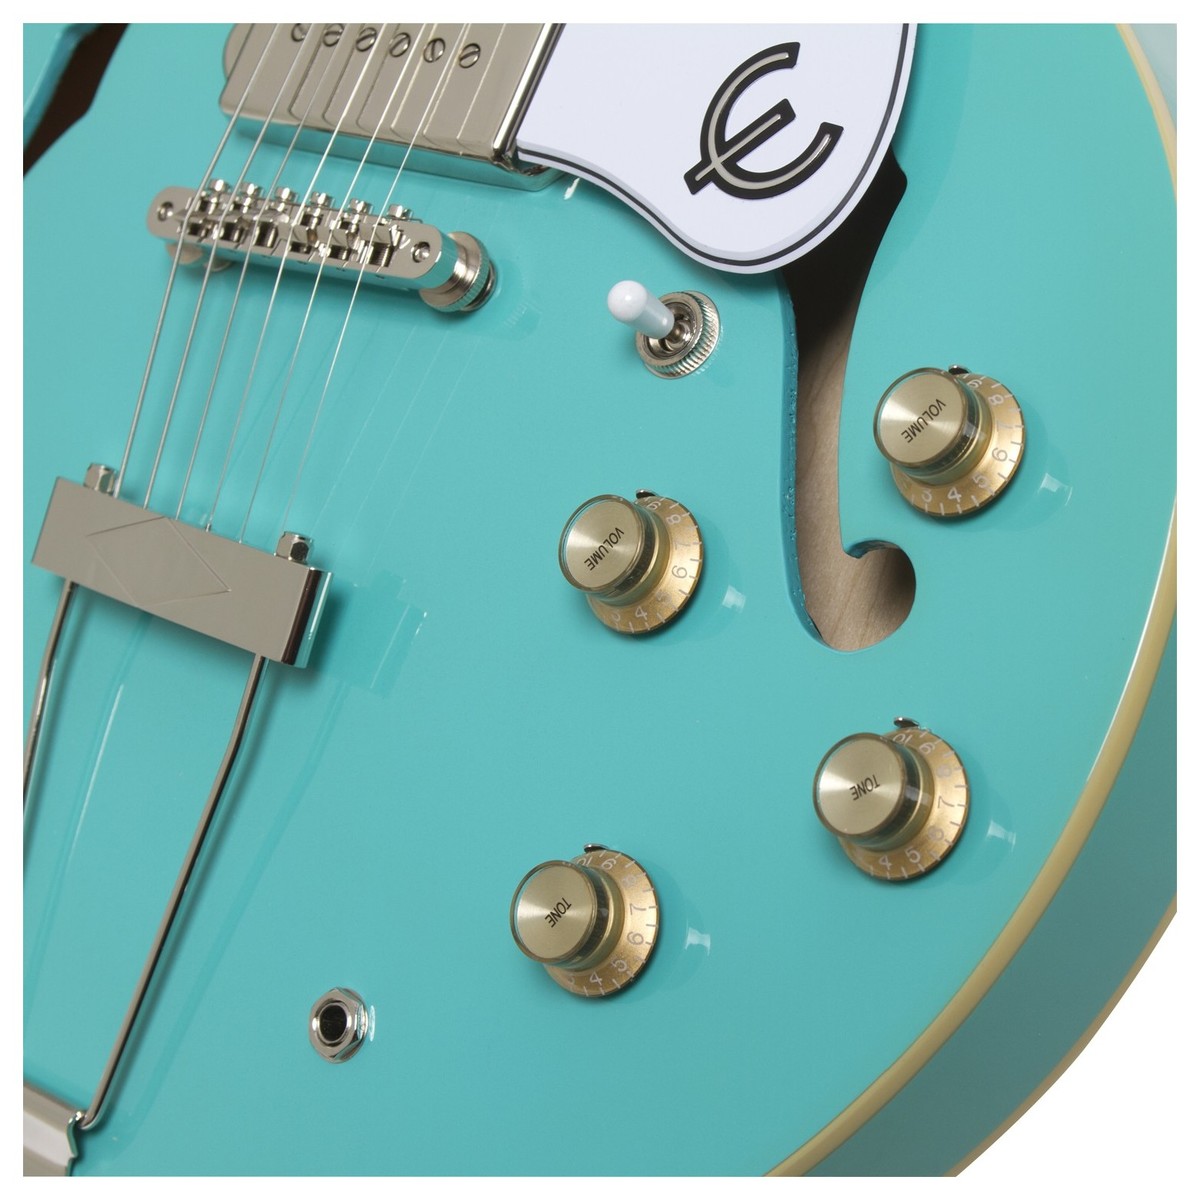 Epiphone Casino Coupe Archtop 2019 2p90 Ht Pf - Turquoise - Semi hollow elektriche gitaar - Variation 1